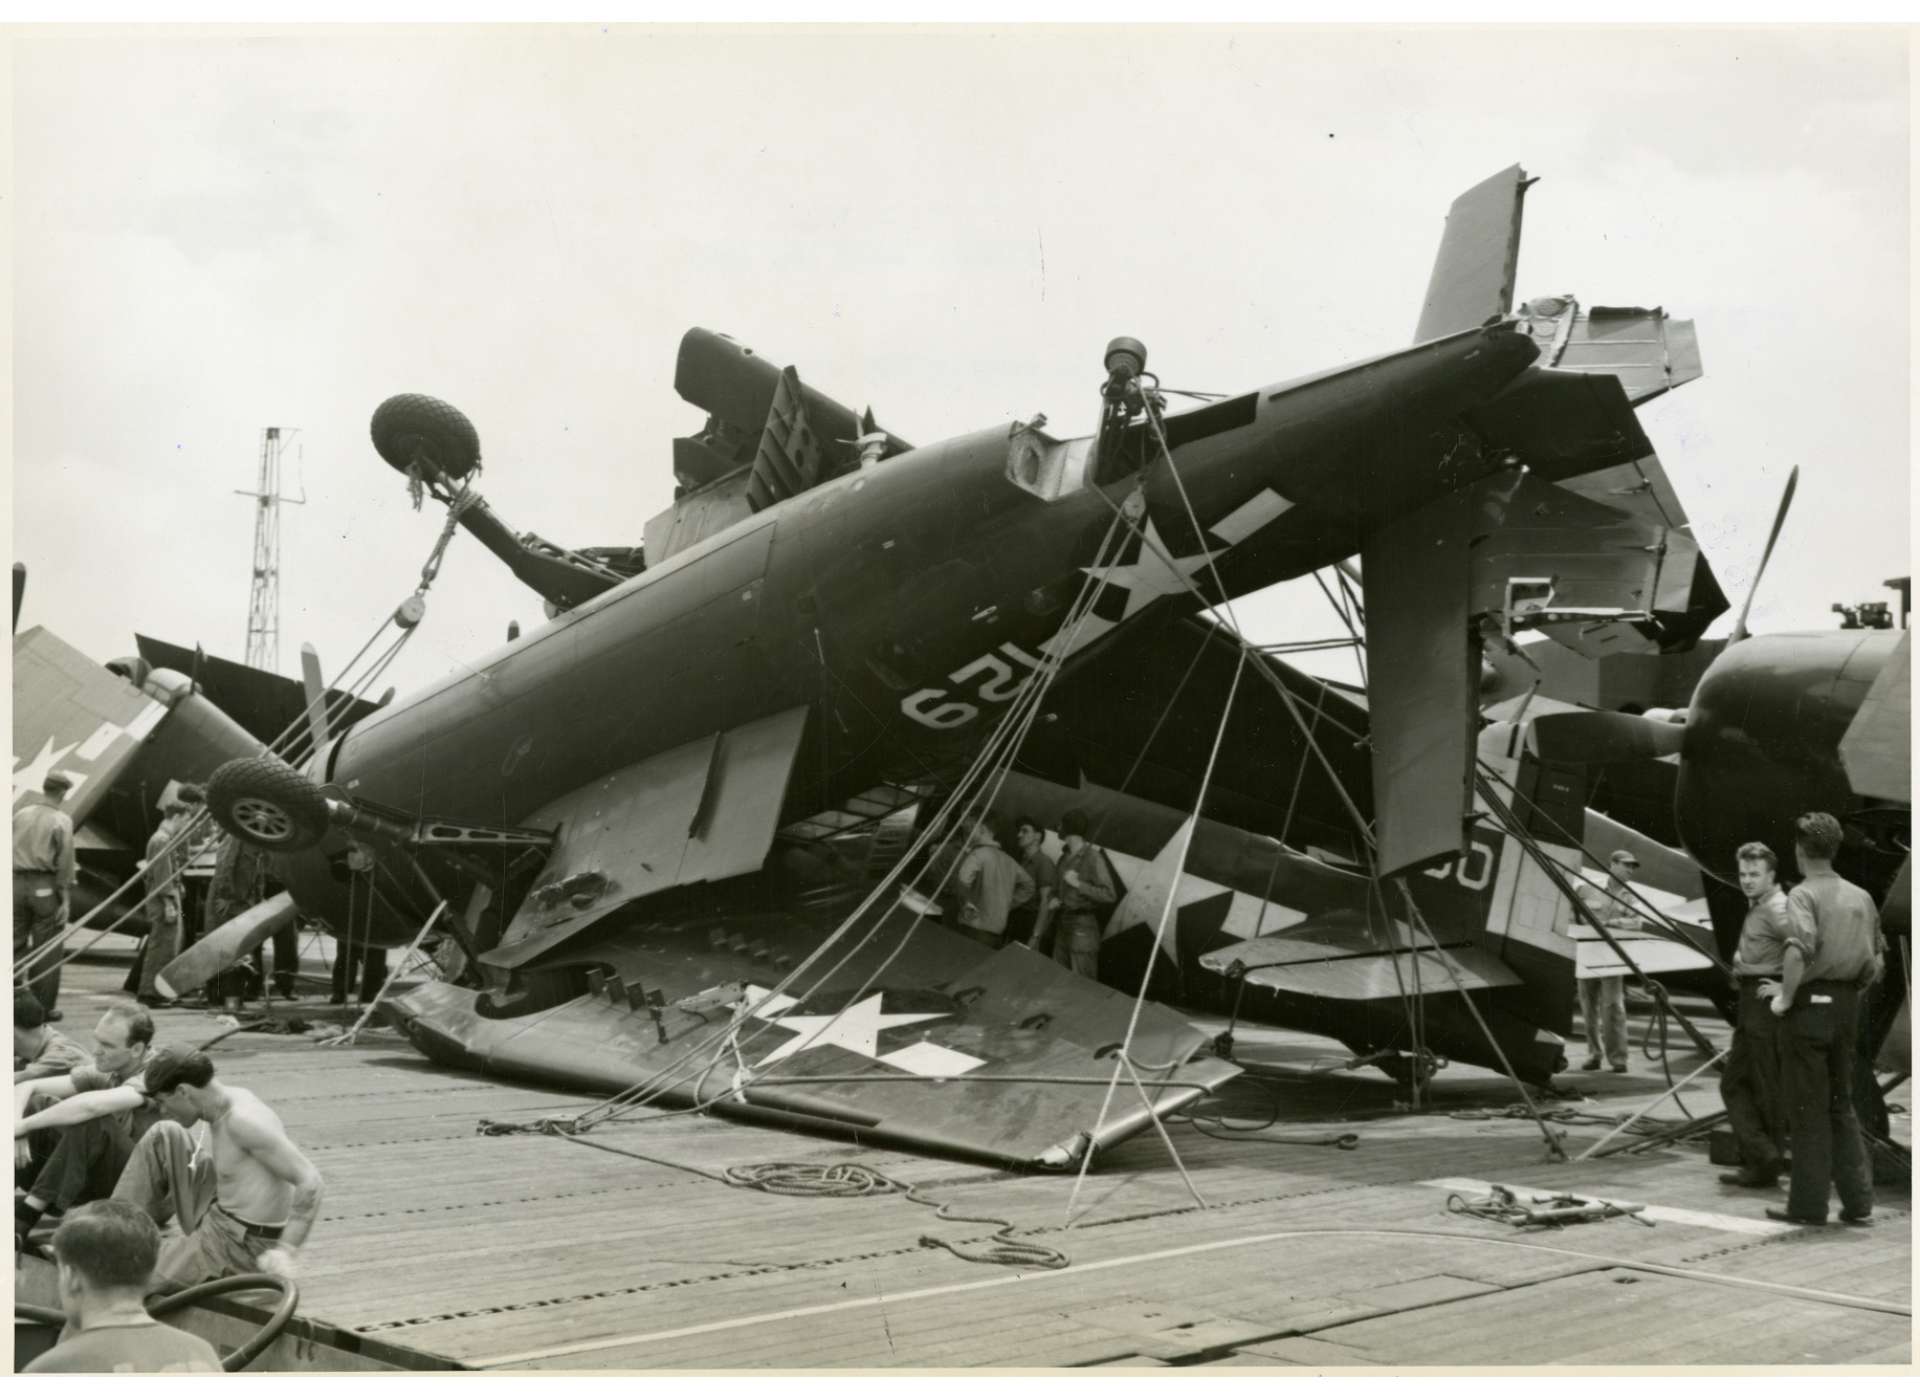 Crews inspect the mangled remains of a TBM Avenger on the deck of the USS Hornet [ITALICS] (CV-12) after Hurricane Cobra swept through in 1944. The National WWII Museum, Gift of Nap Pozulp, Ph.D., 2018.067.798.